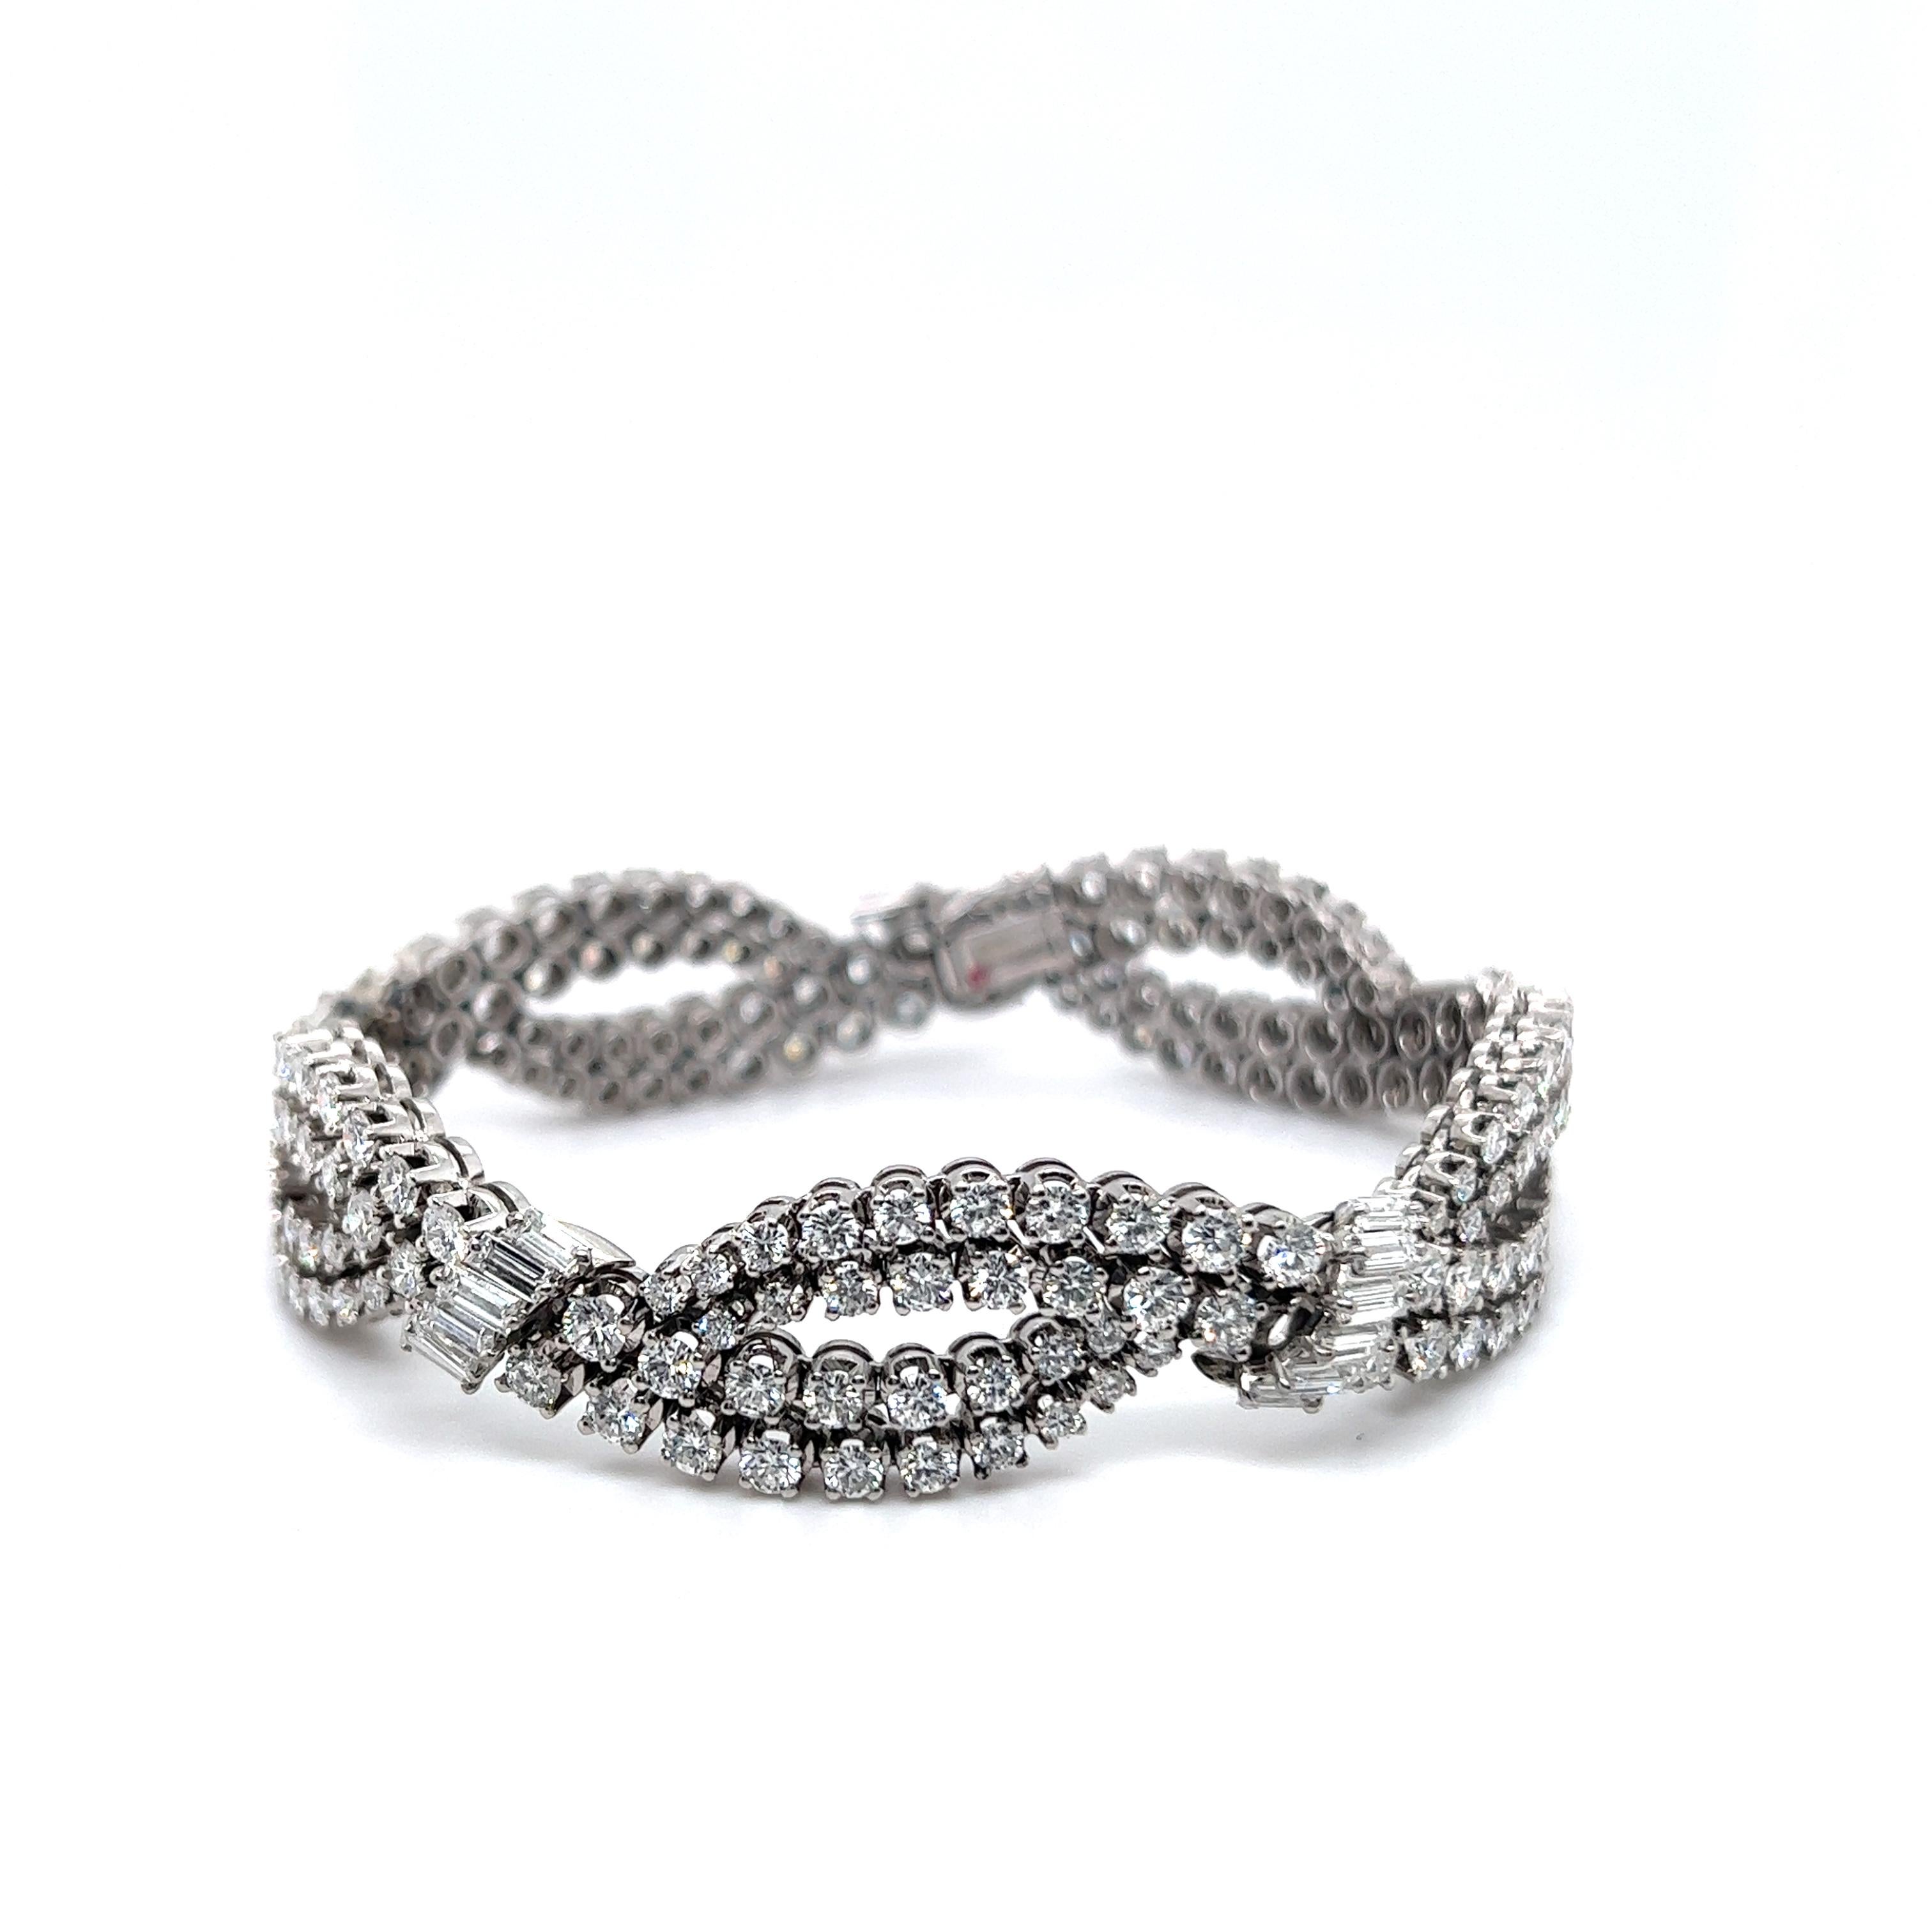 An aesthetic bracelet woven with diamonds in 18 Karat white gold. The charm of the classics, embodied in elegant design and exceptional quality. 

180 brilliant cut diamonds of tot. 9.40 carats create four strands intertwined with each other. Each